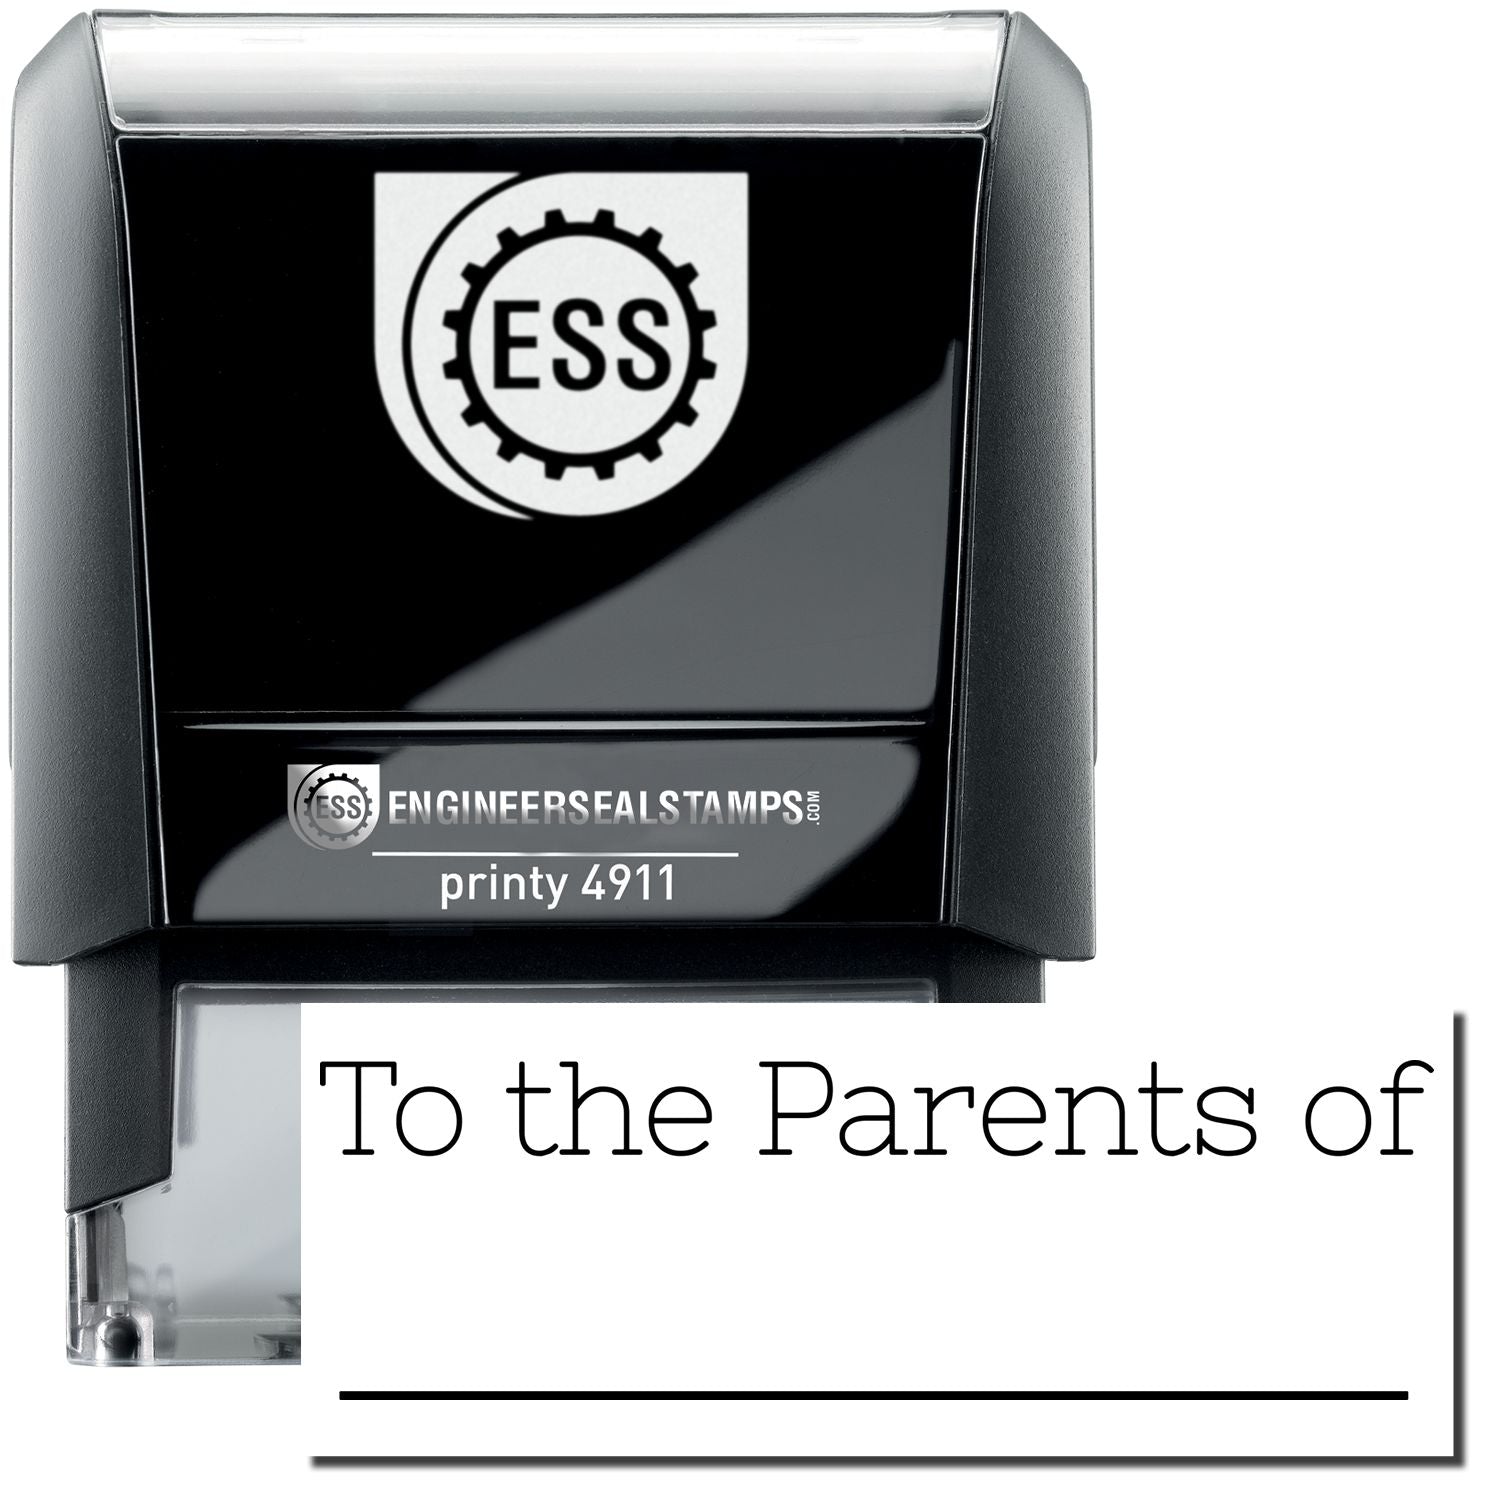 A self-inking stamp with a stamped image showing how the text "To the Parents of" (in a skinny font with a line underneath) is displayed after stamping.